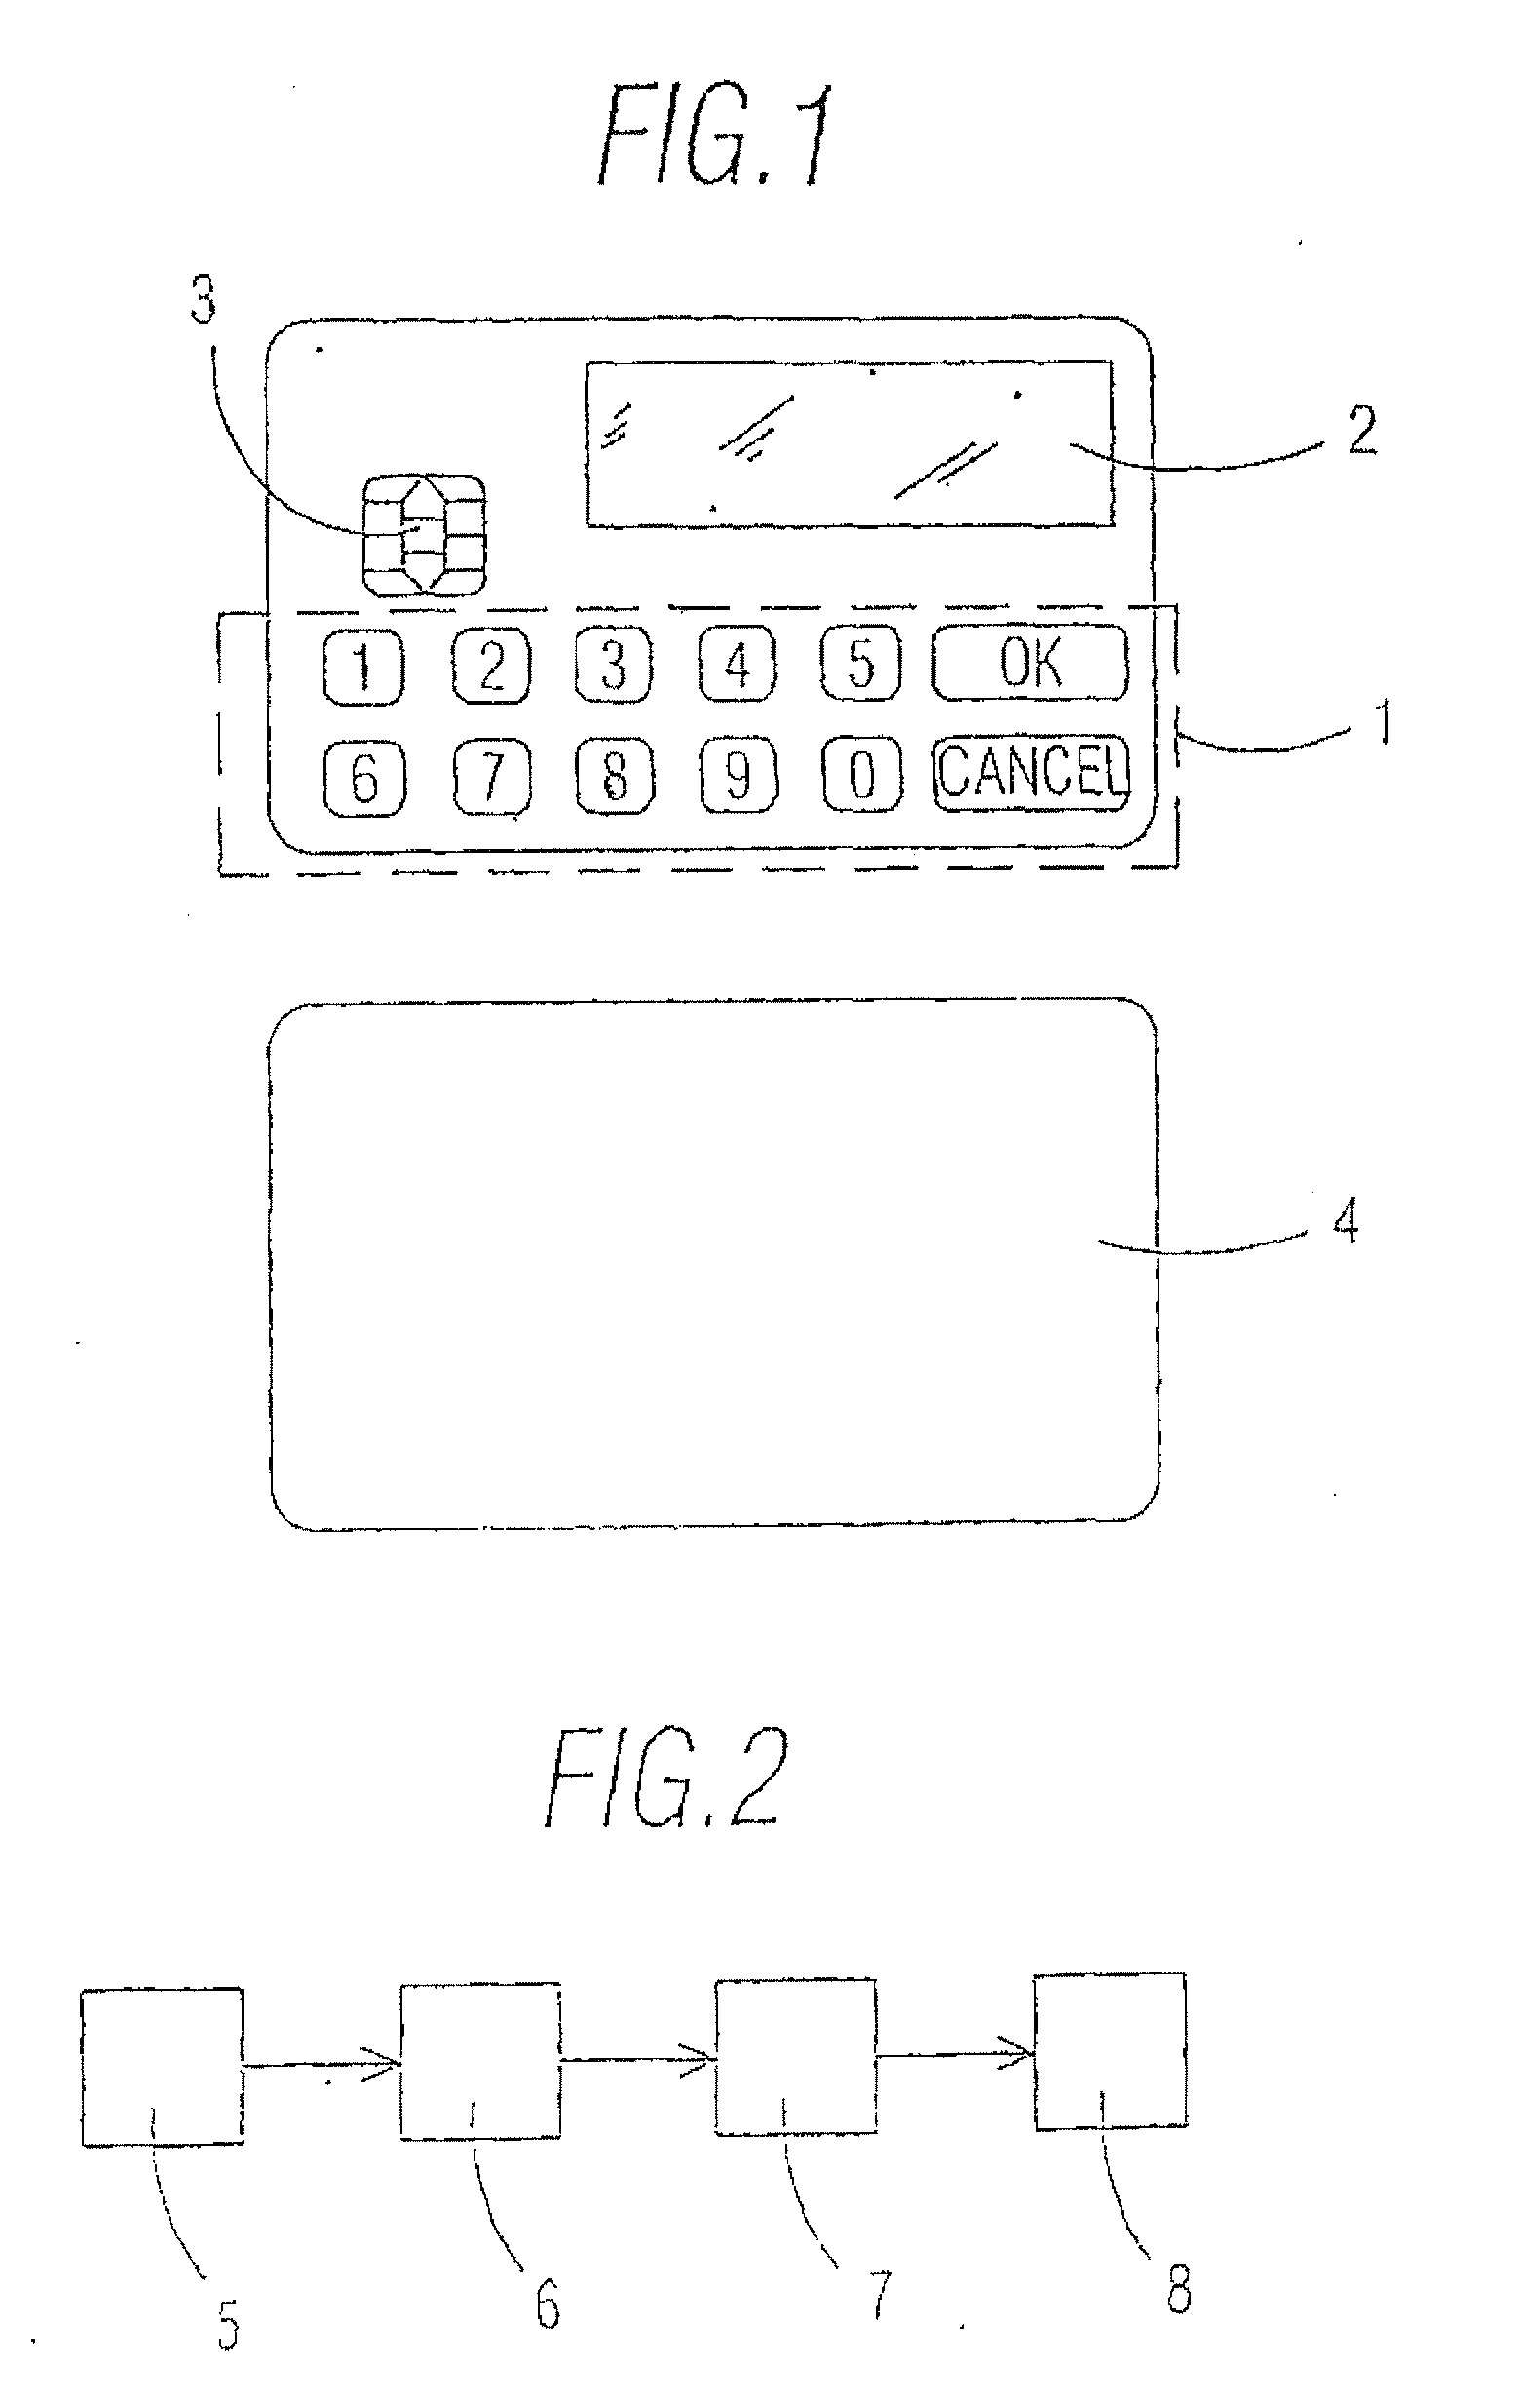 External signature device for a PC with wireless communication capacity